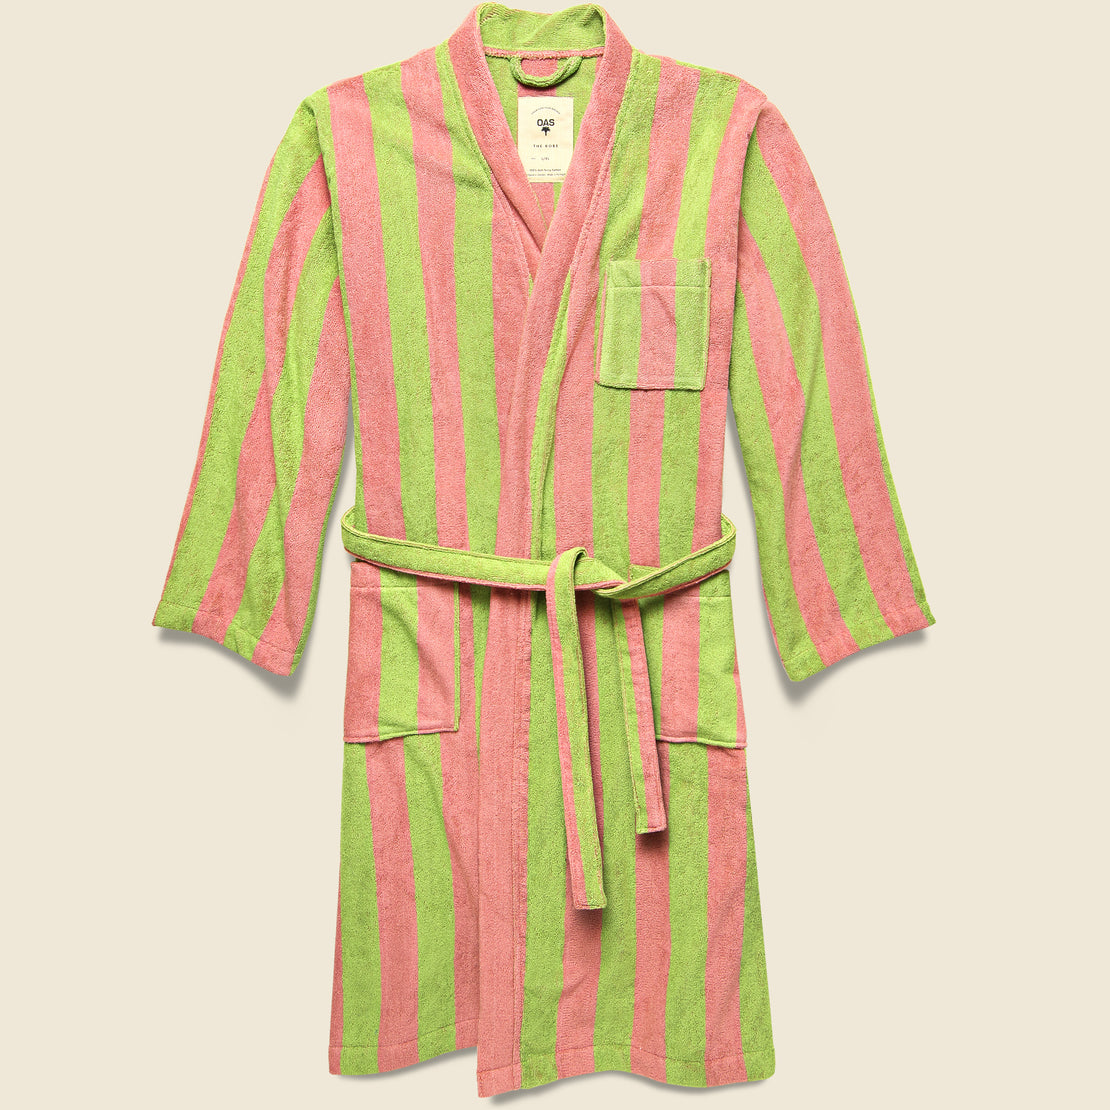 OAS The Berry Robe - Pink/Green Stripe